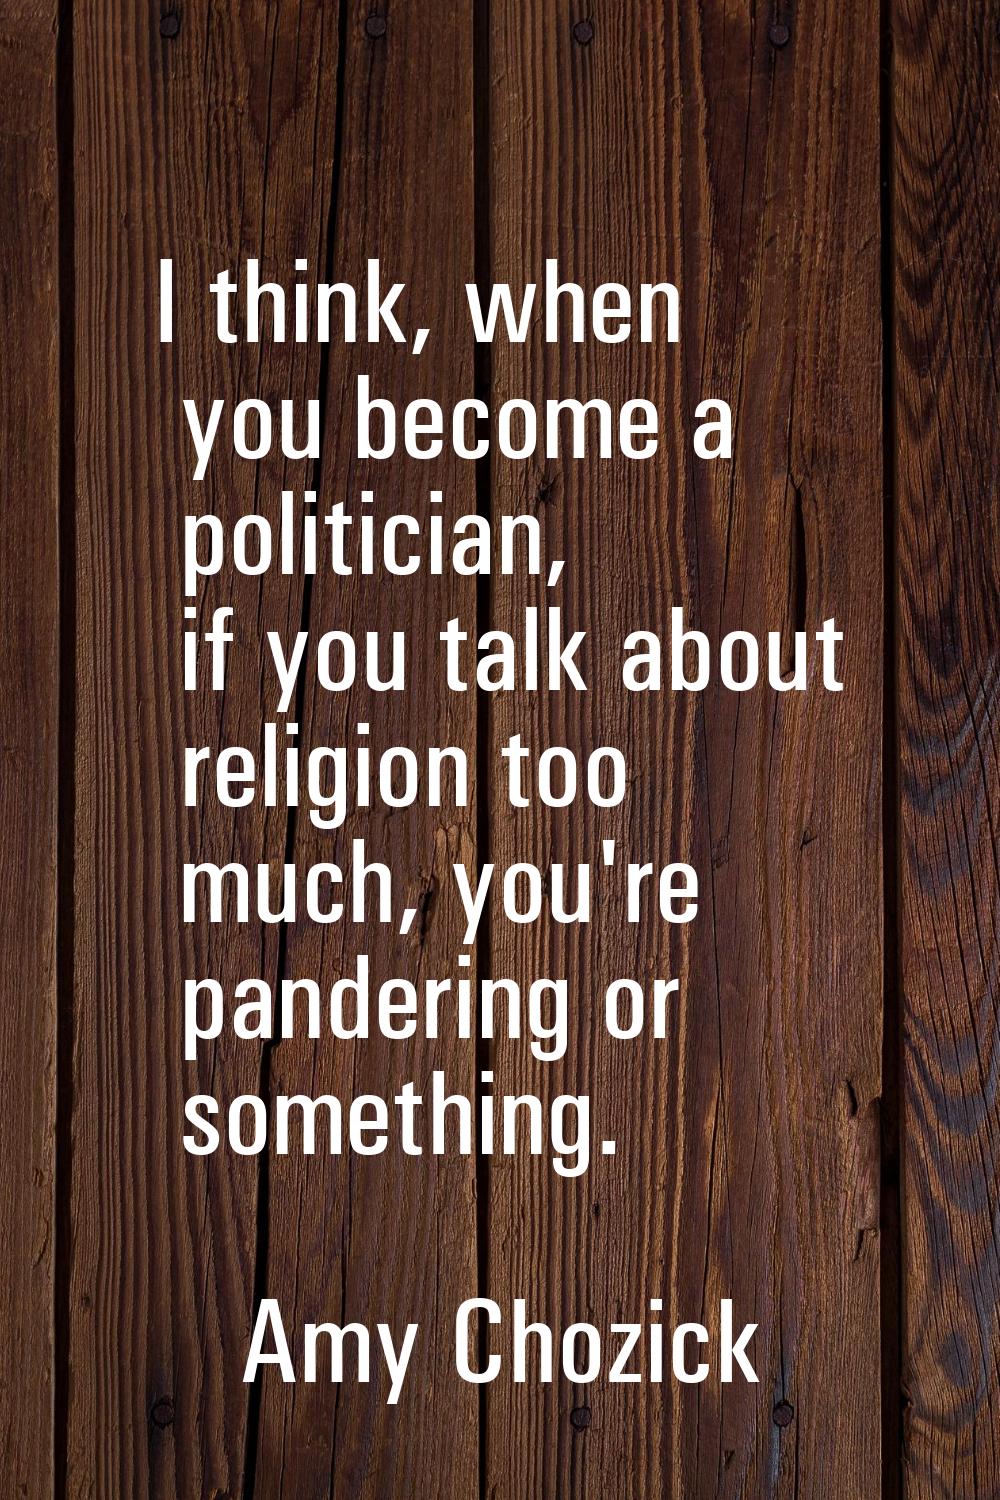 I think, when you become a politician, if you talk about religion too much, you're pandering or som